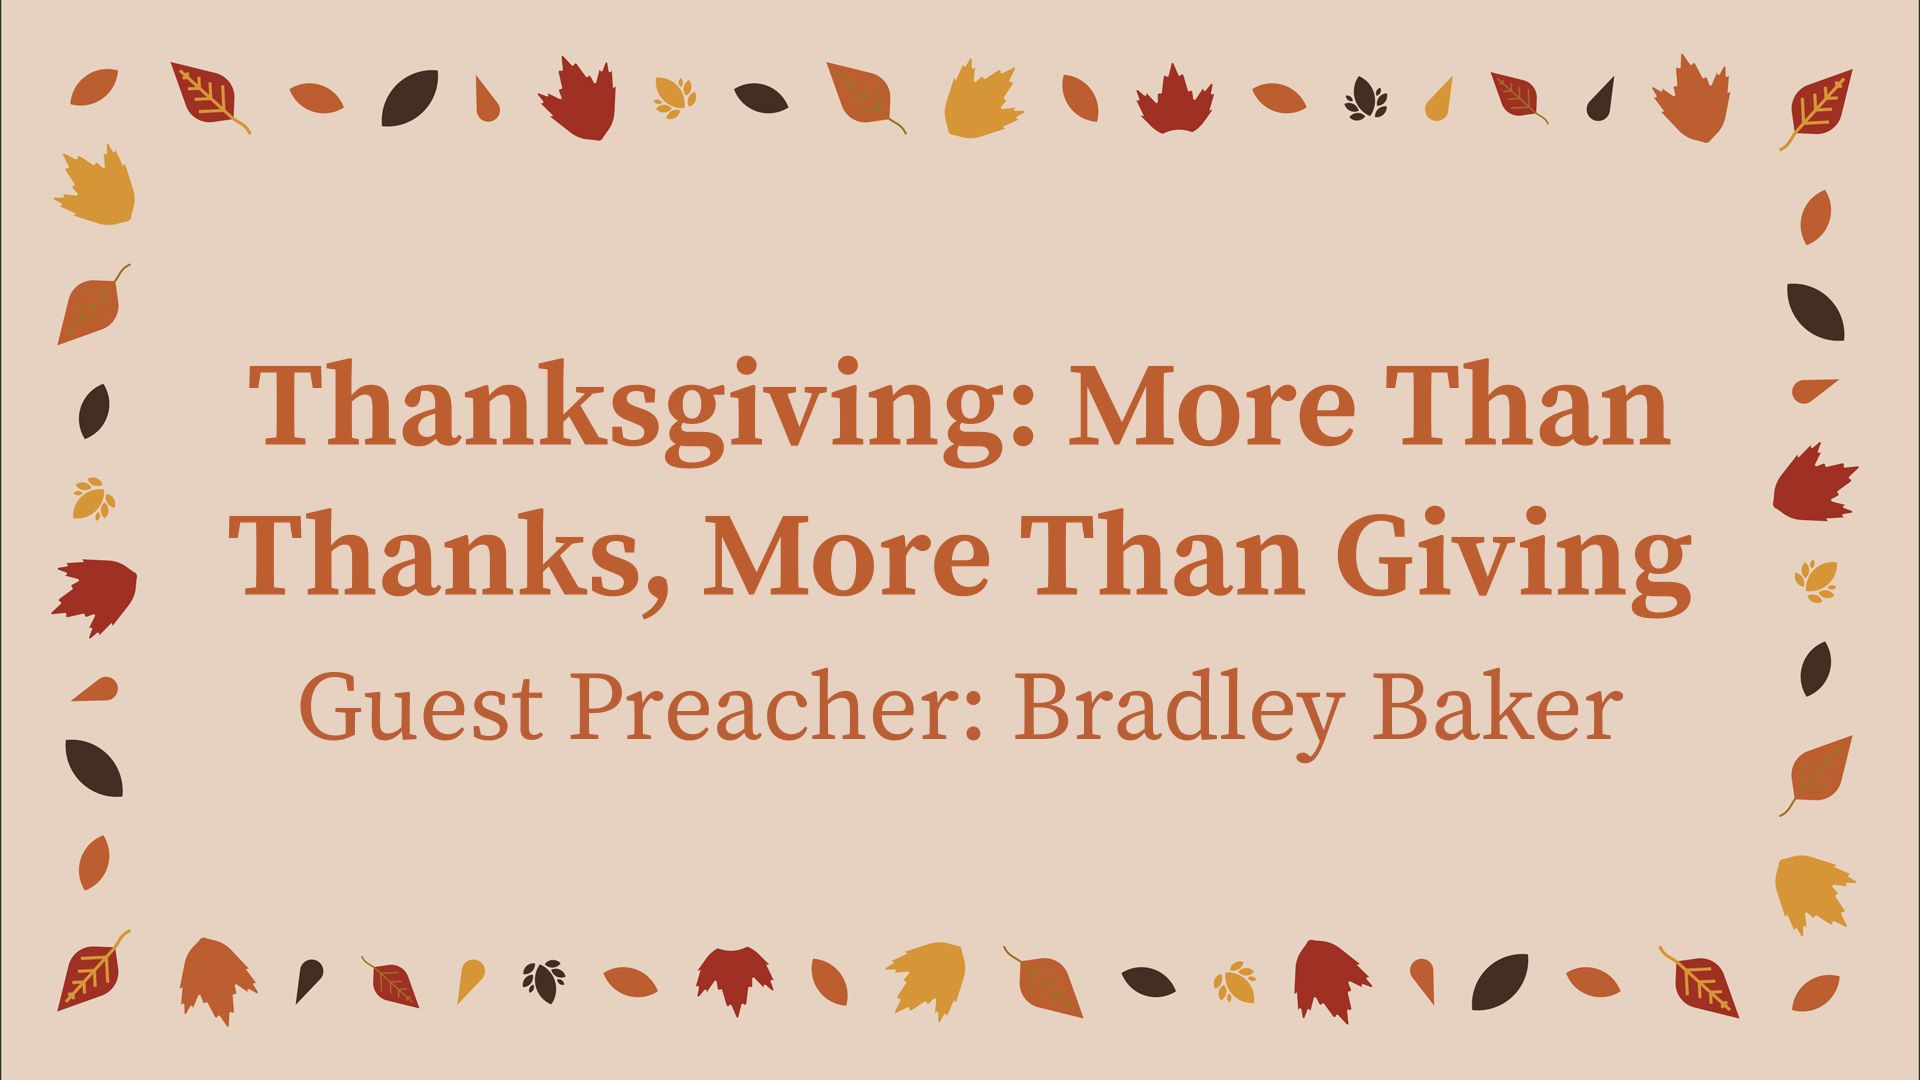 Thanksgiving: More Than Thanks, More Than Giving